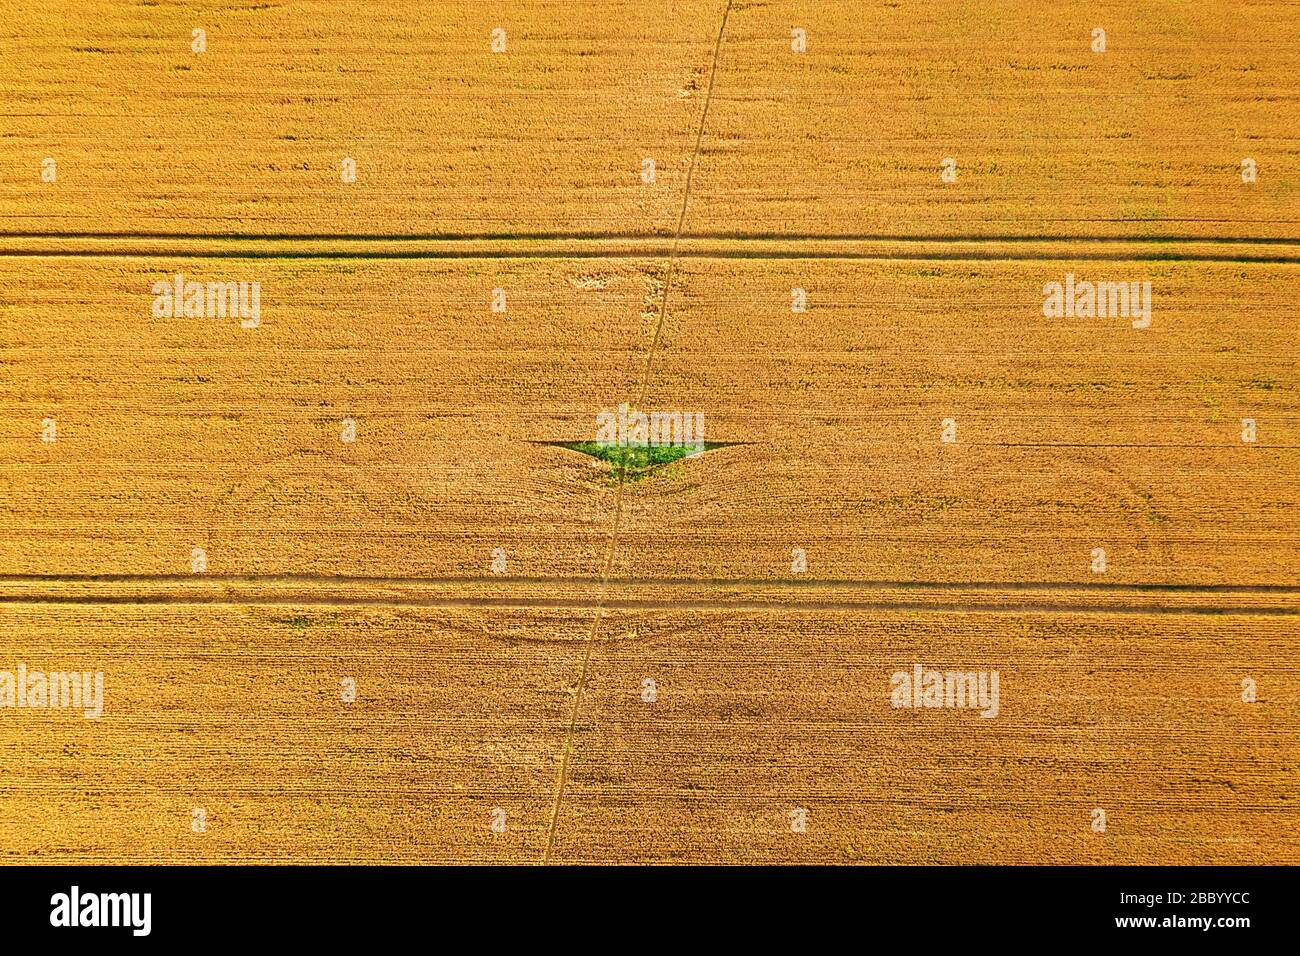 Aerial photo flying over yellow grain wheat field, ready for harvest. Agricultural landscape Stock Photo